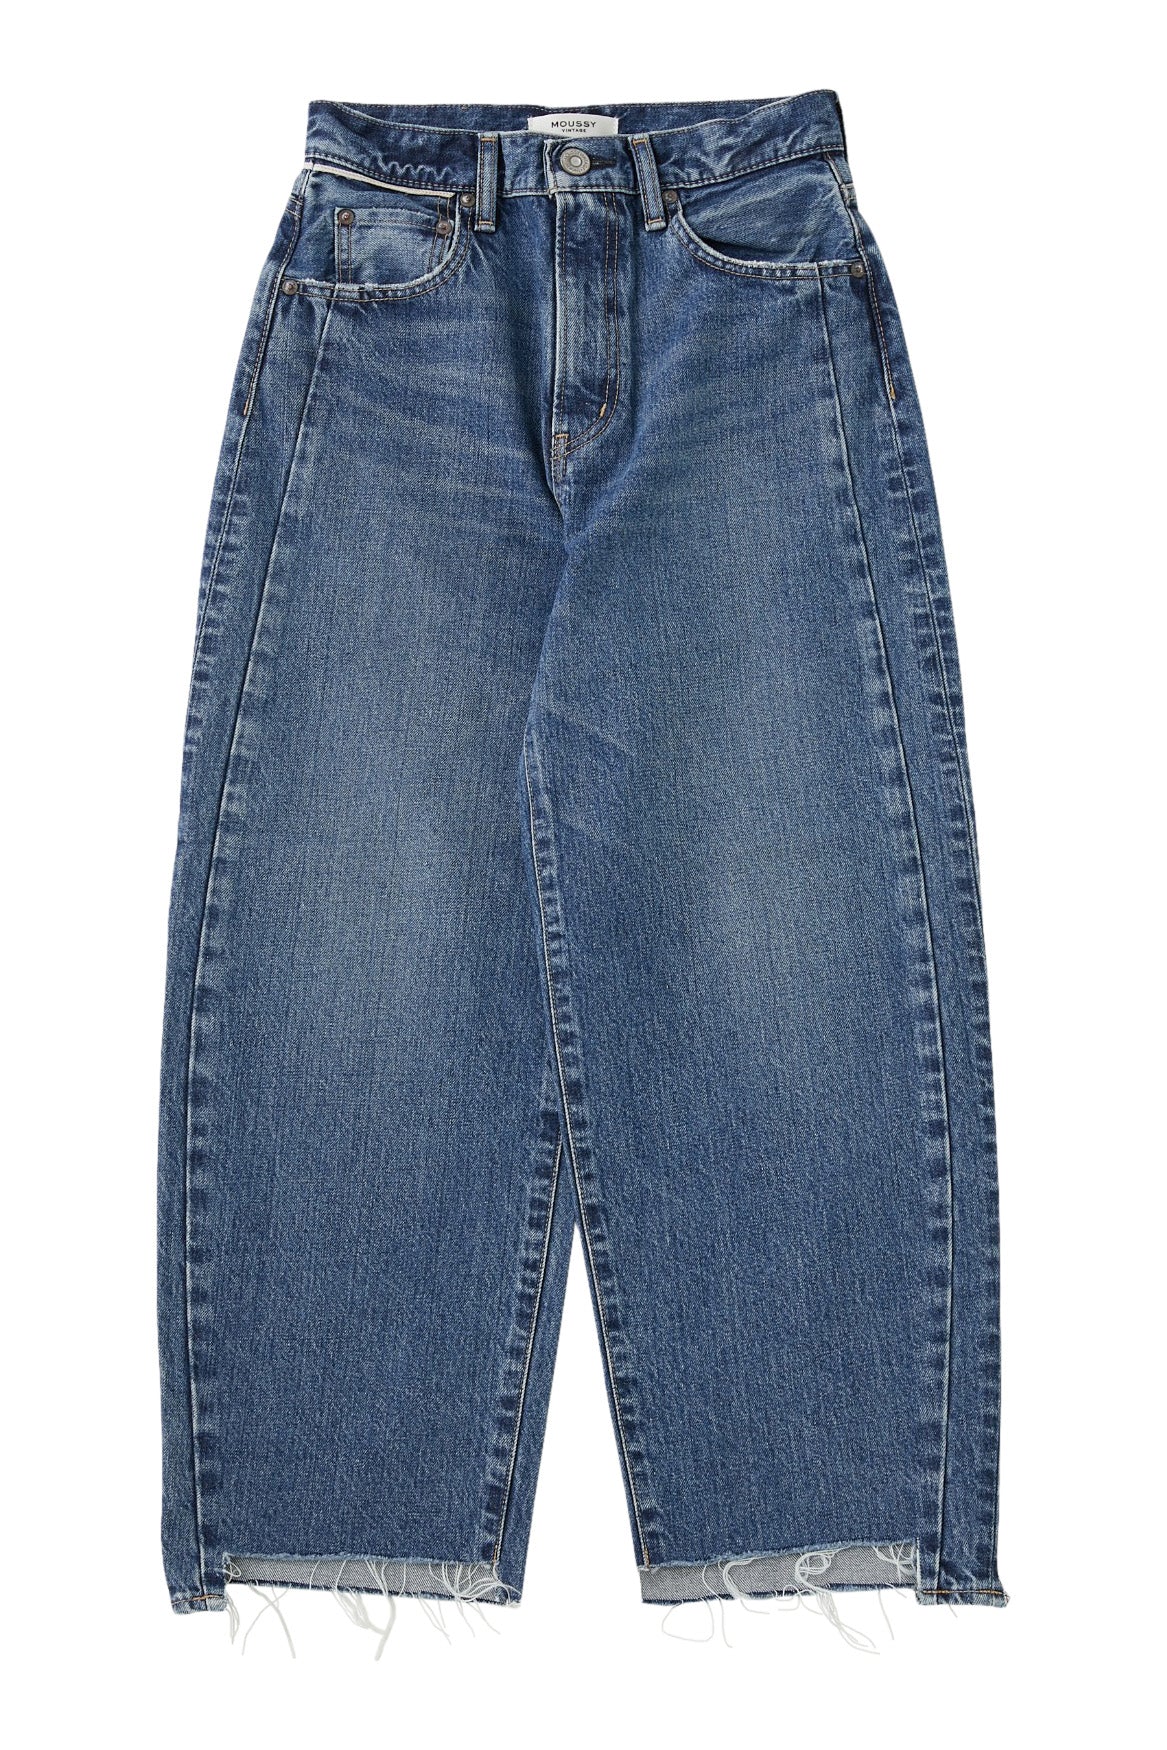 Moussy Denim Dunkirk Round Pants in Blue